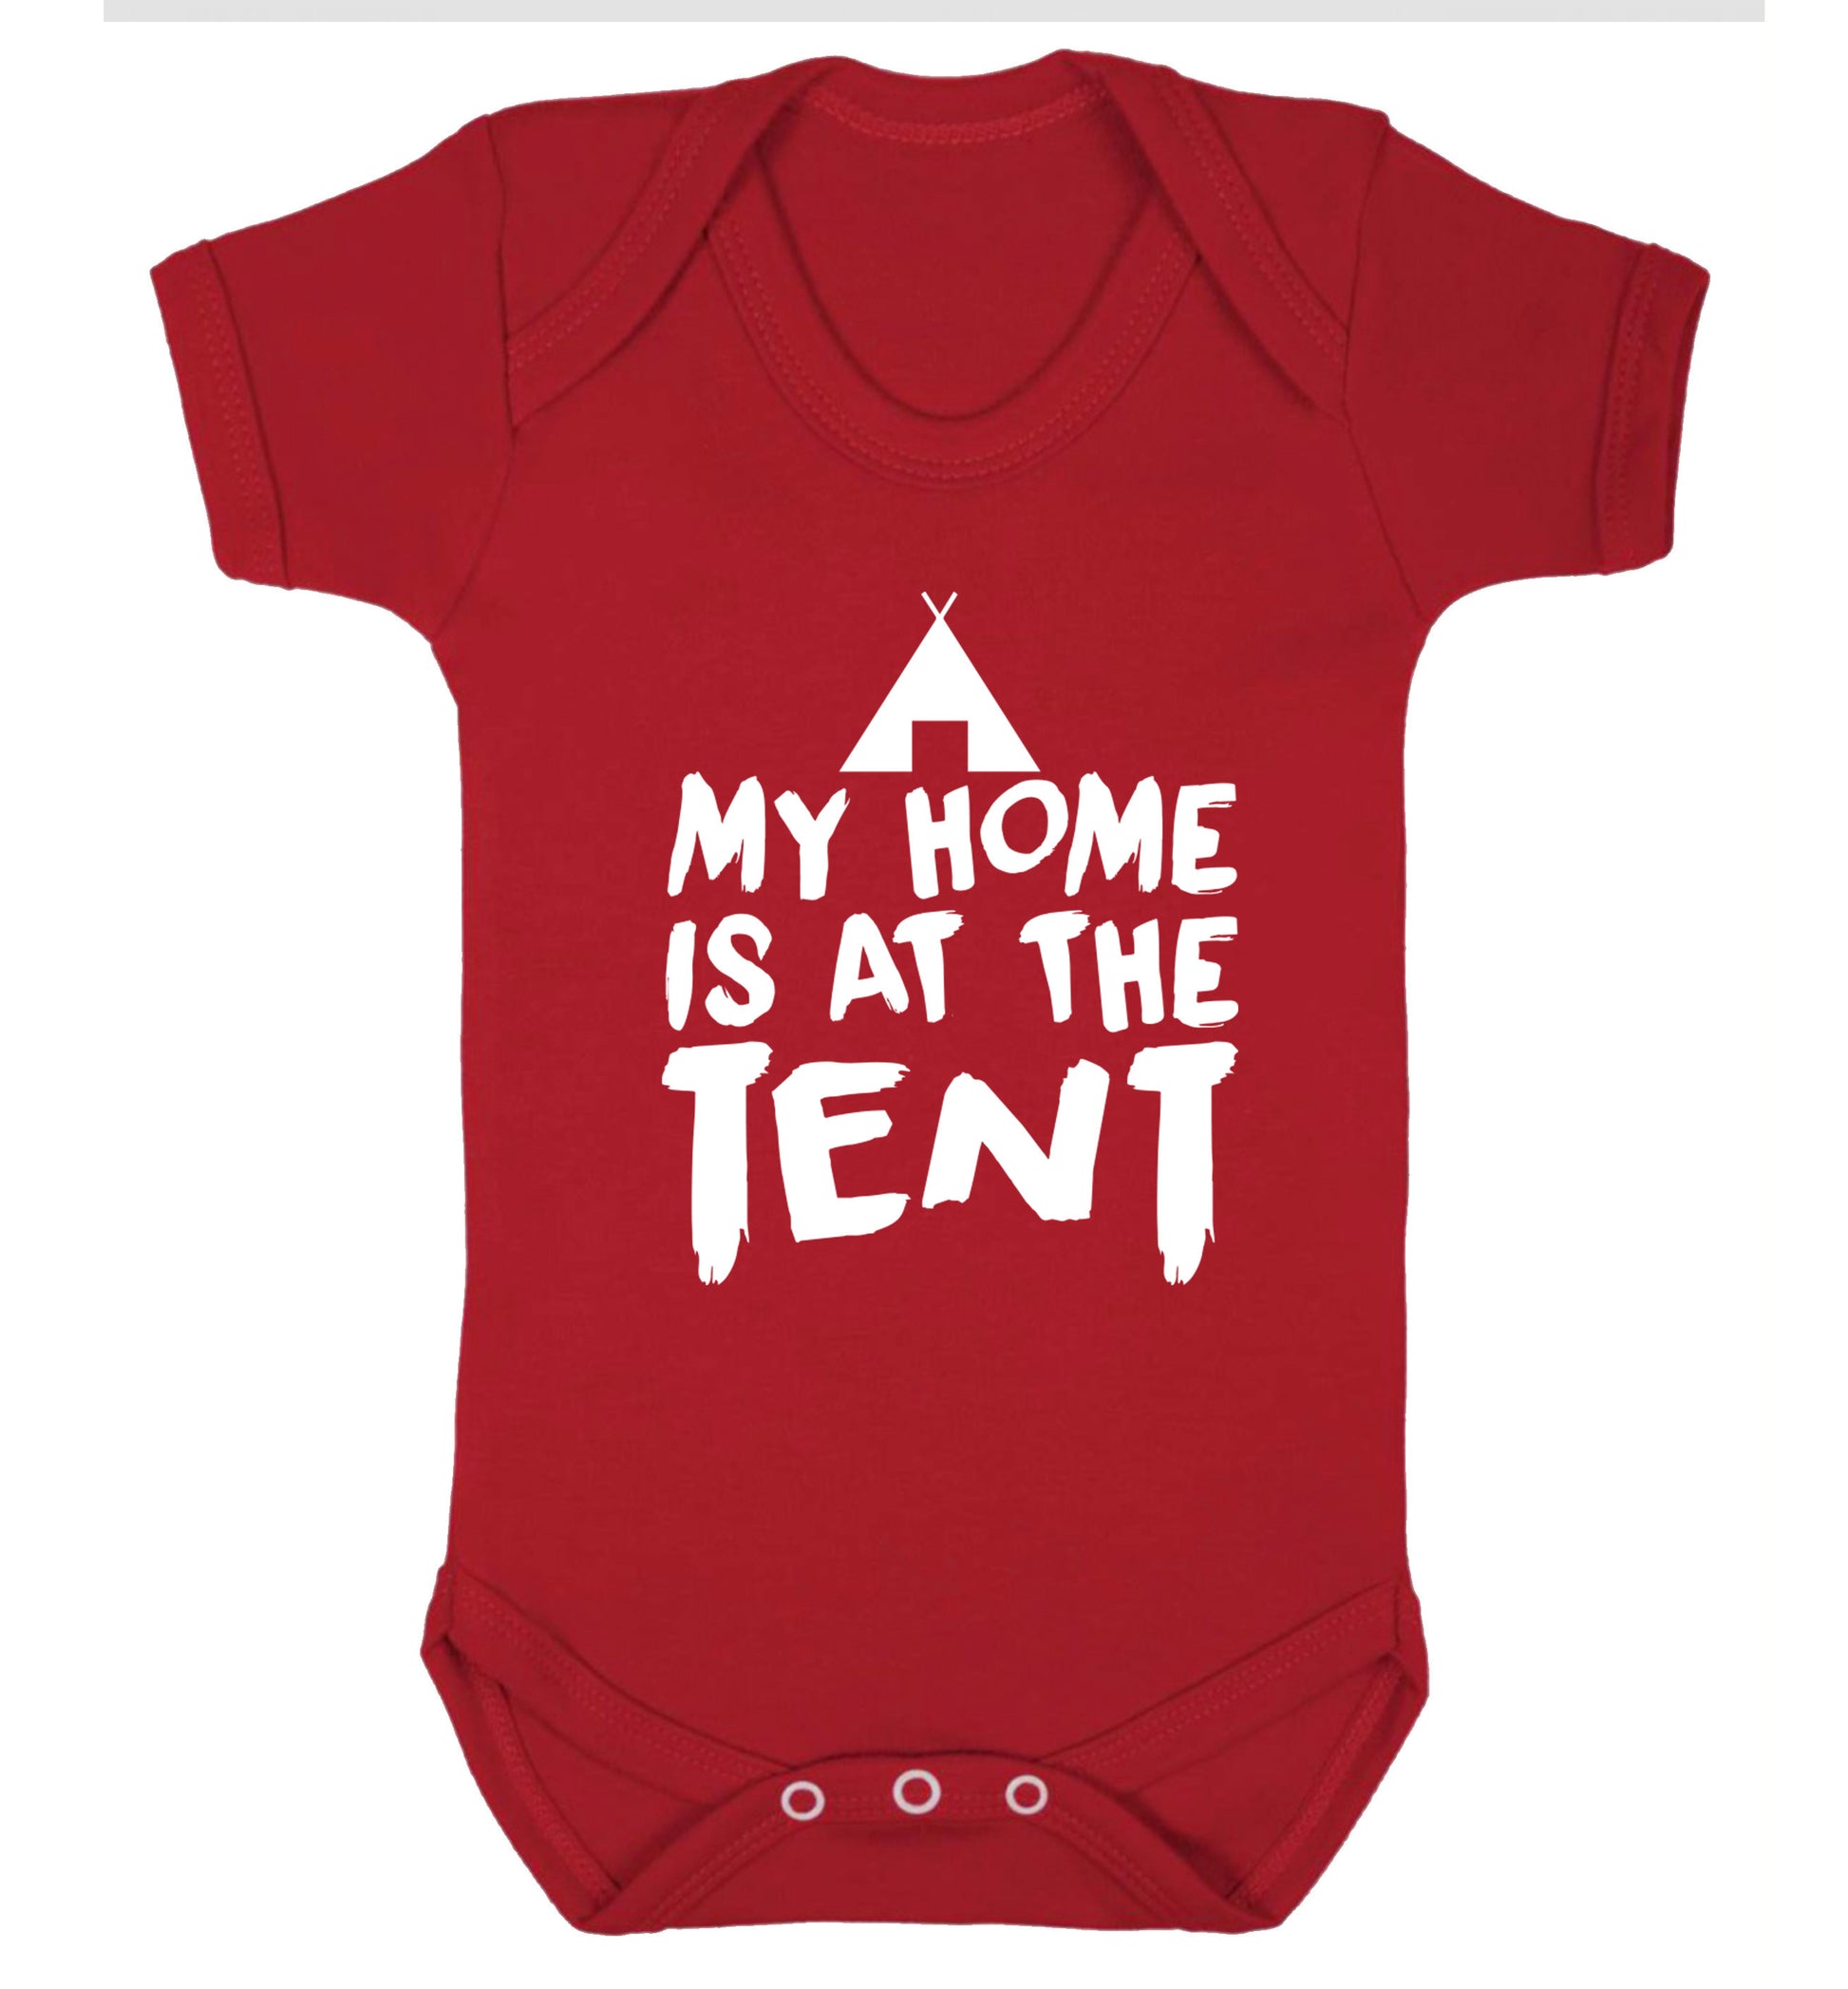 My home is at the tent Baby Vest red 18-24 months